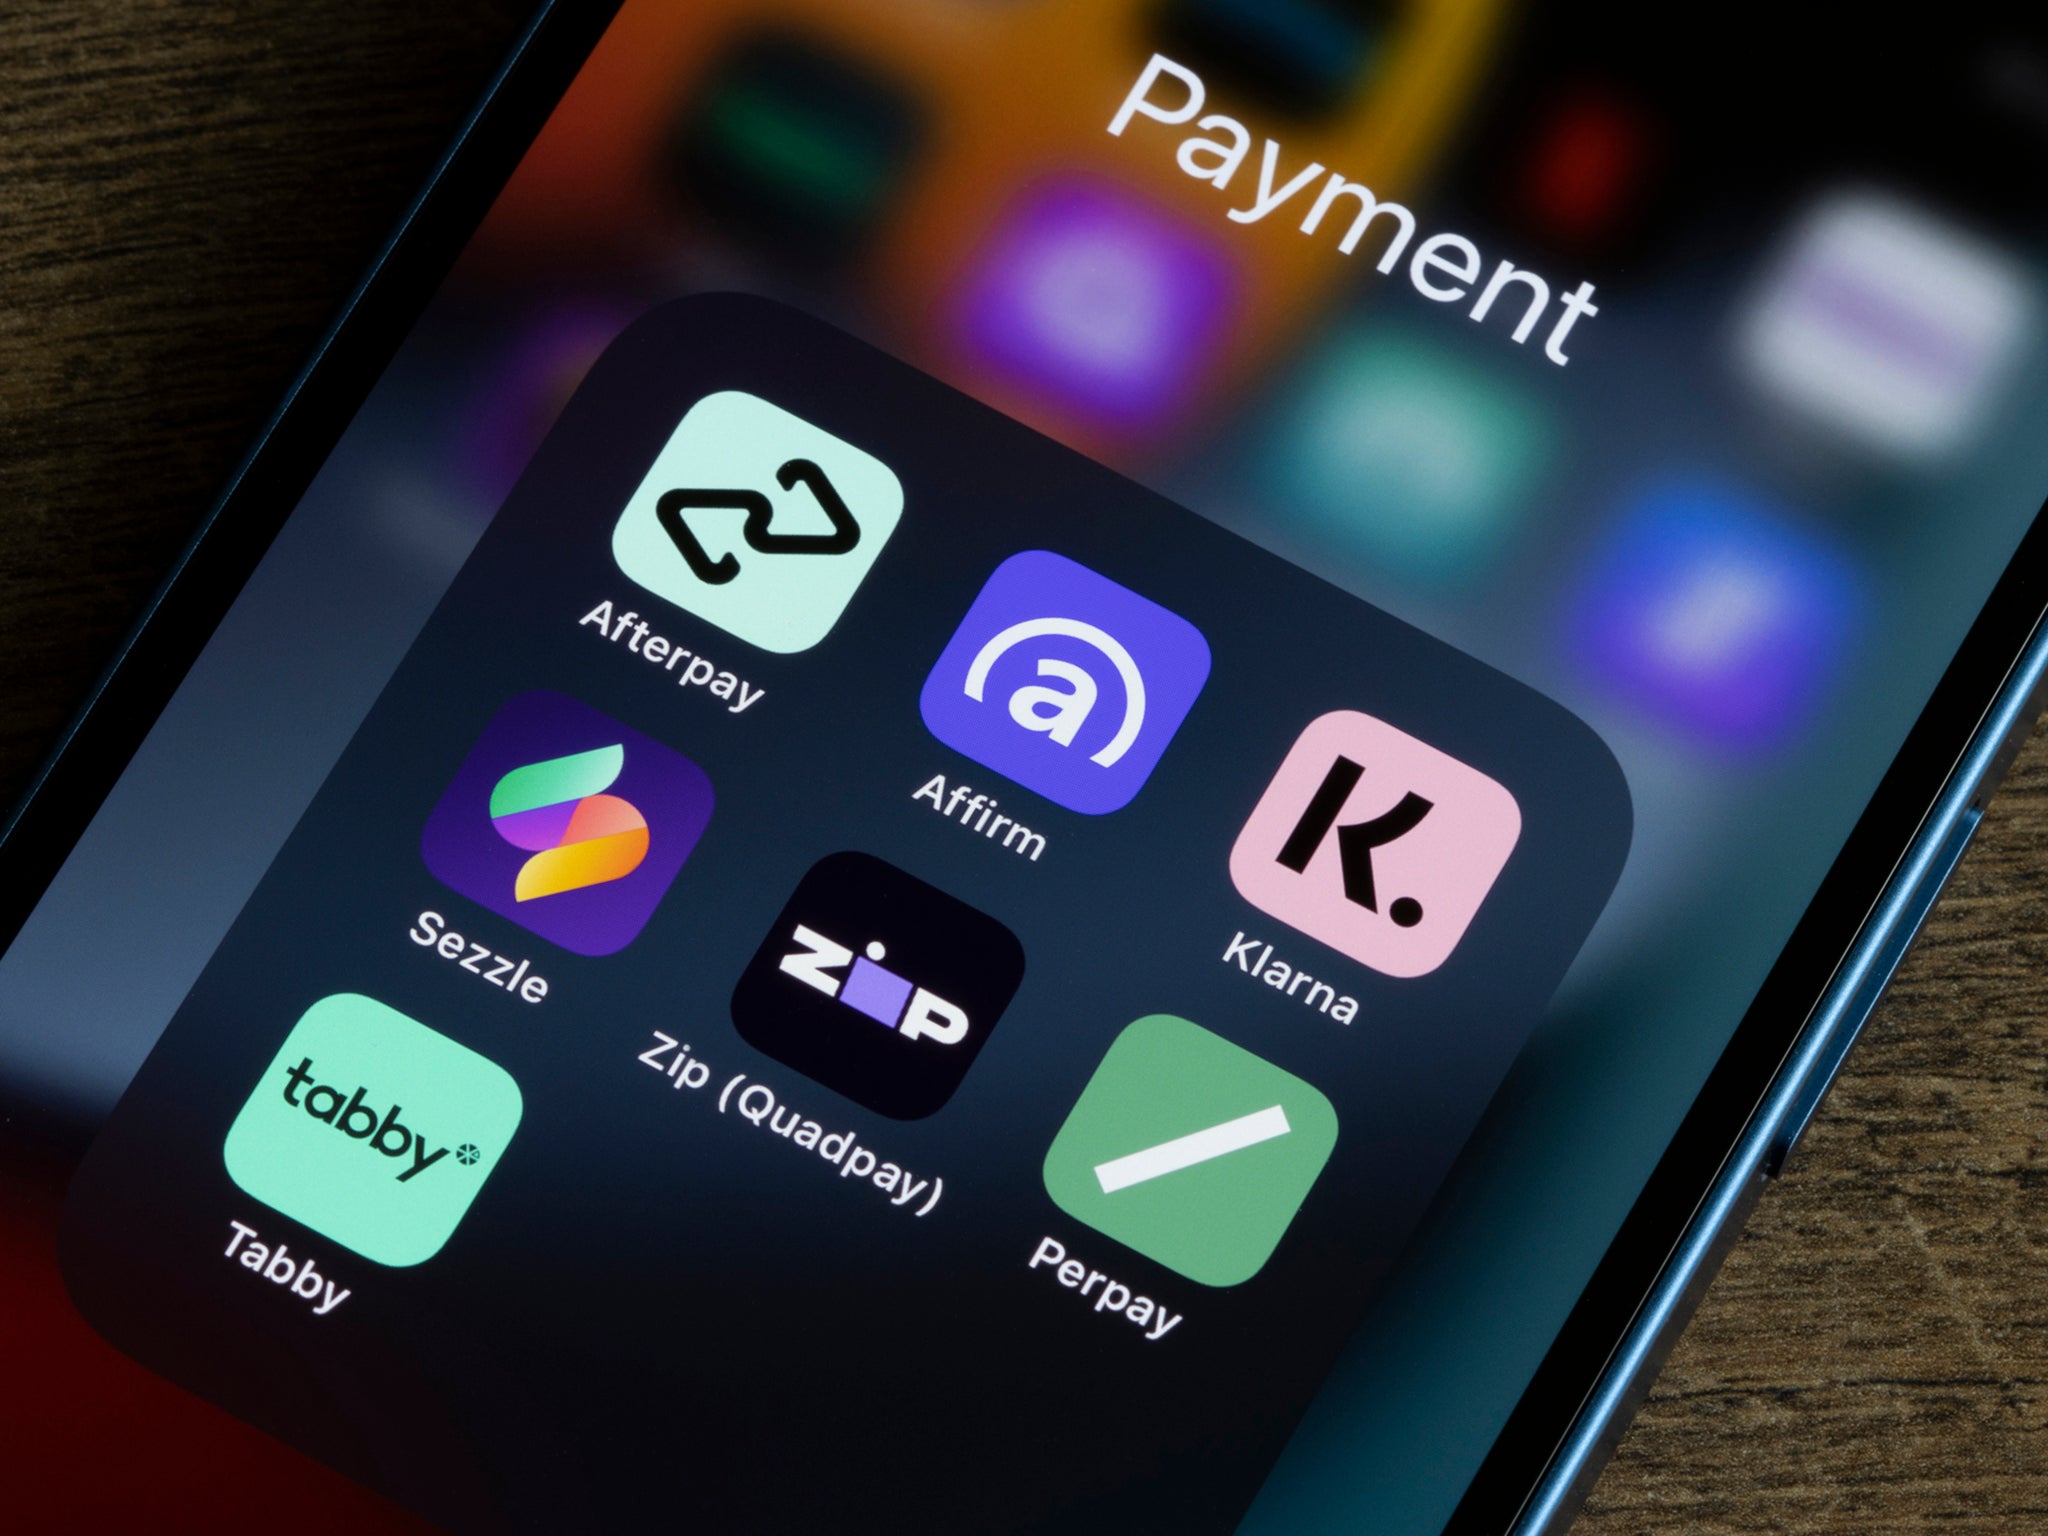 Assorted payment apps offering Buy Now Pay Later services are seen on an iPhone, including Afterpay, Affirm, Klarna, Sezzle, Zip (Quadpay), Perpay, and Tabby